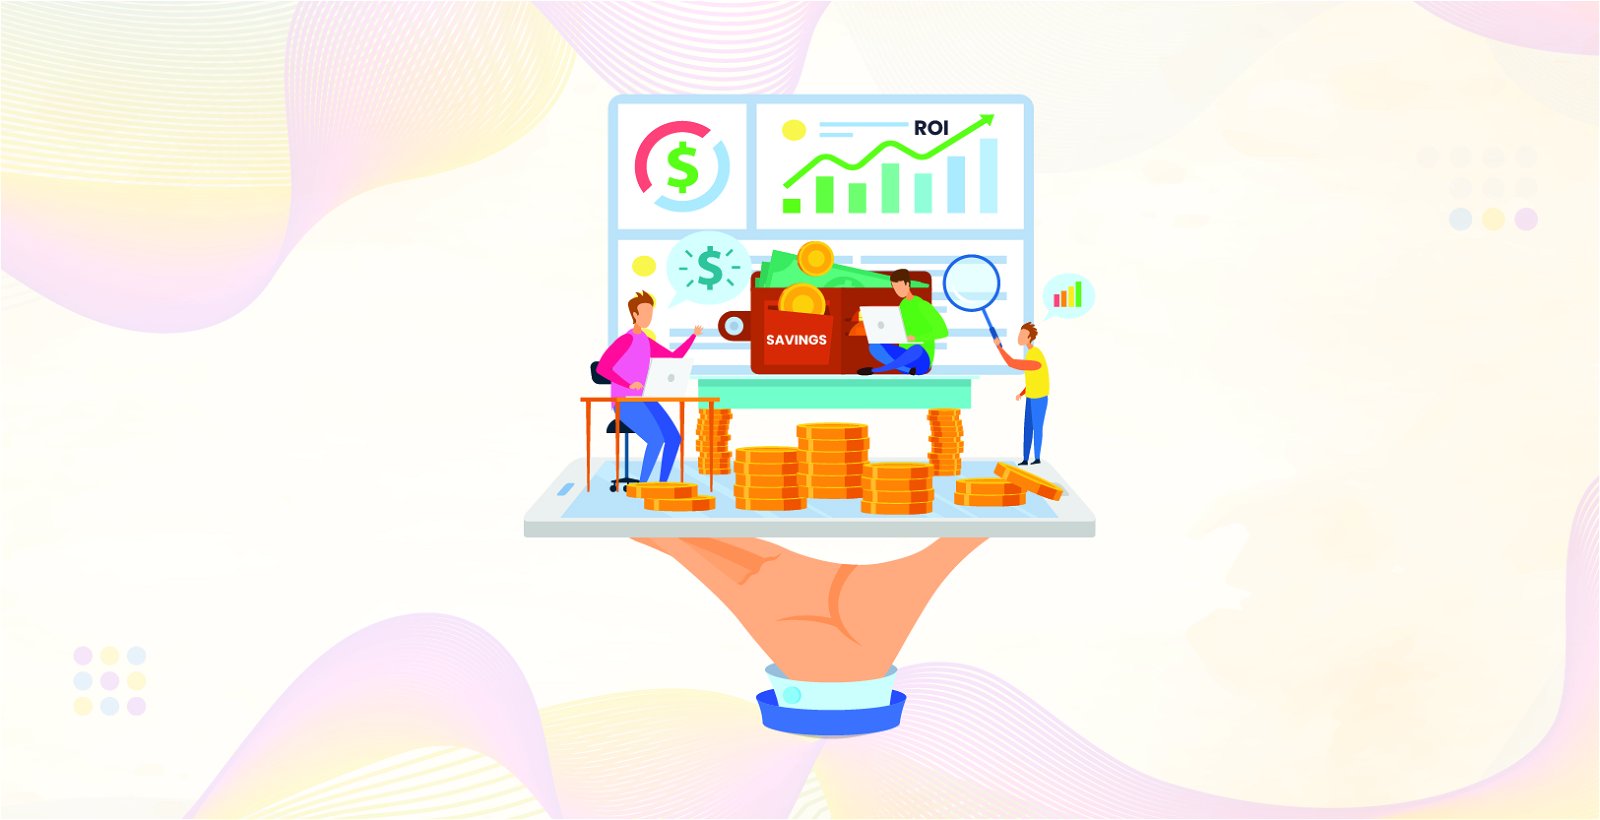 ⁠Measure and Maximize E-commerce ROI Through Strategic Outsourcing. It Is All About Cost Savings, Efficiency, and Growth.